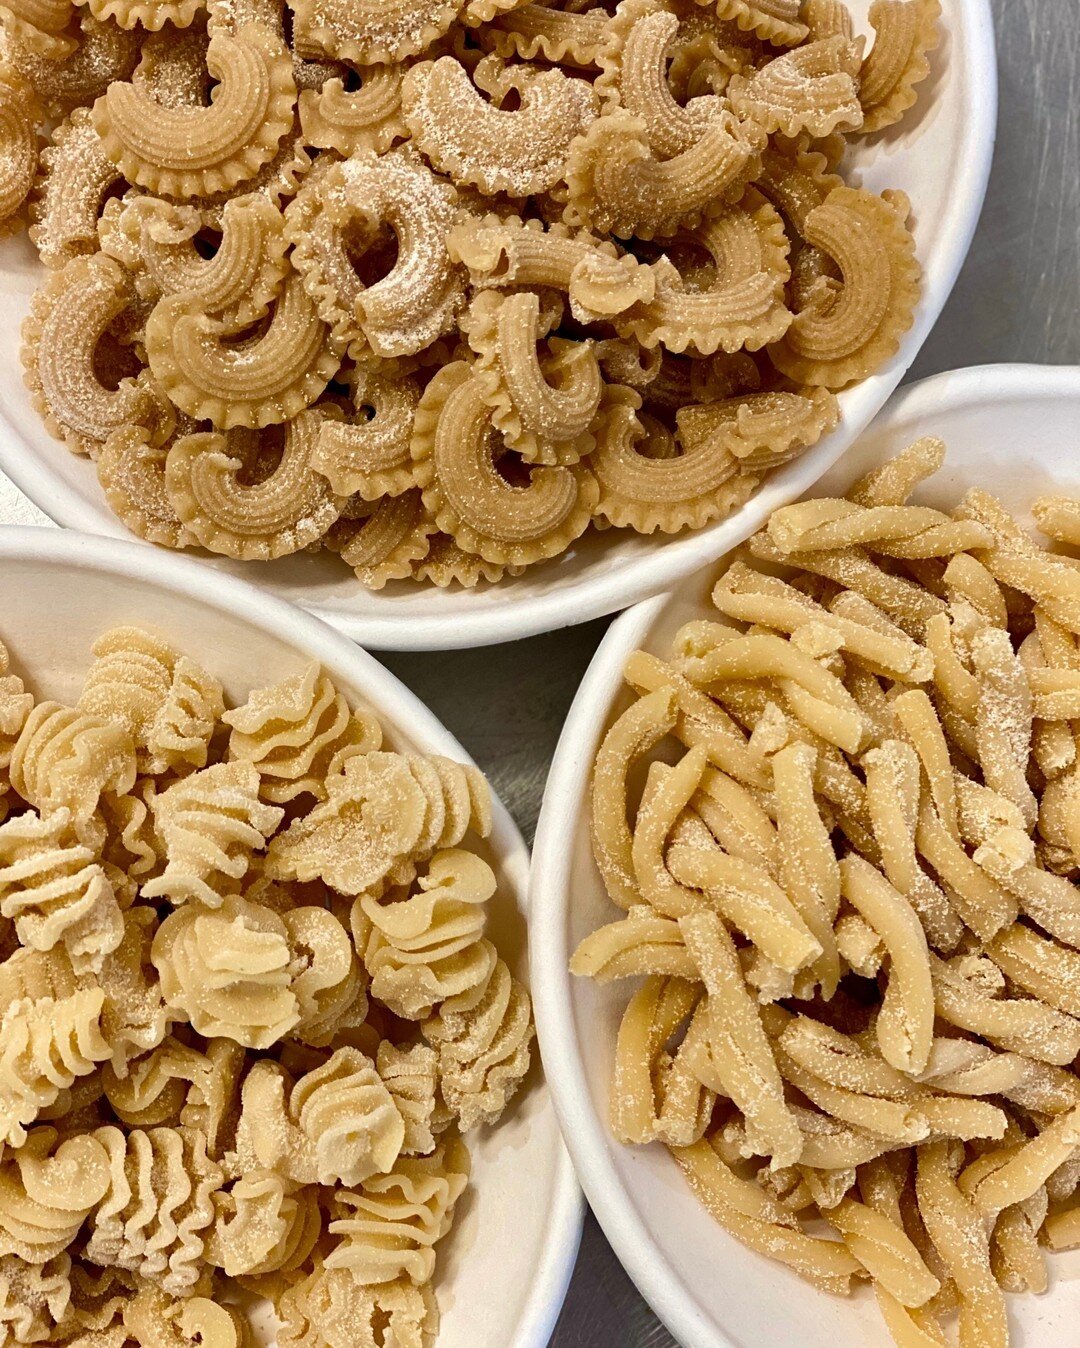 Fresh hand made pasta available in the shop today until sold out! Don&rsquo;t miss out! ​​​​​​​​
​​​​​​​​
Happy Sunday!! ☀️​​​​​​​​
​​​​​​​​
​​​​​​​​
​​​​​​​​
#betterbread #bredco #bredbread #albany #sustainable #artisanbread #lovacore #sourdough #re